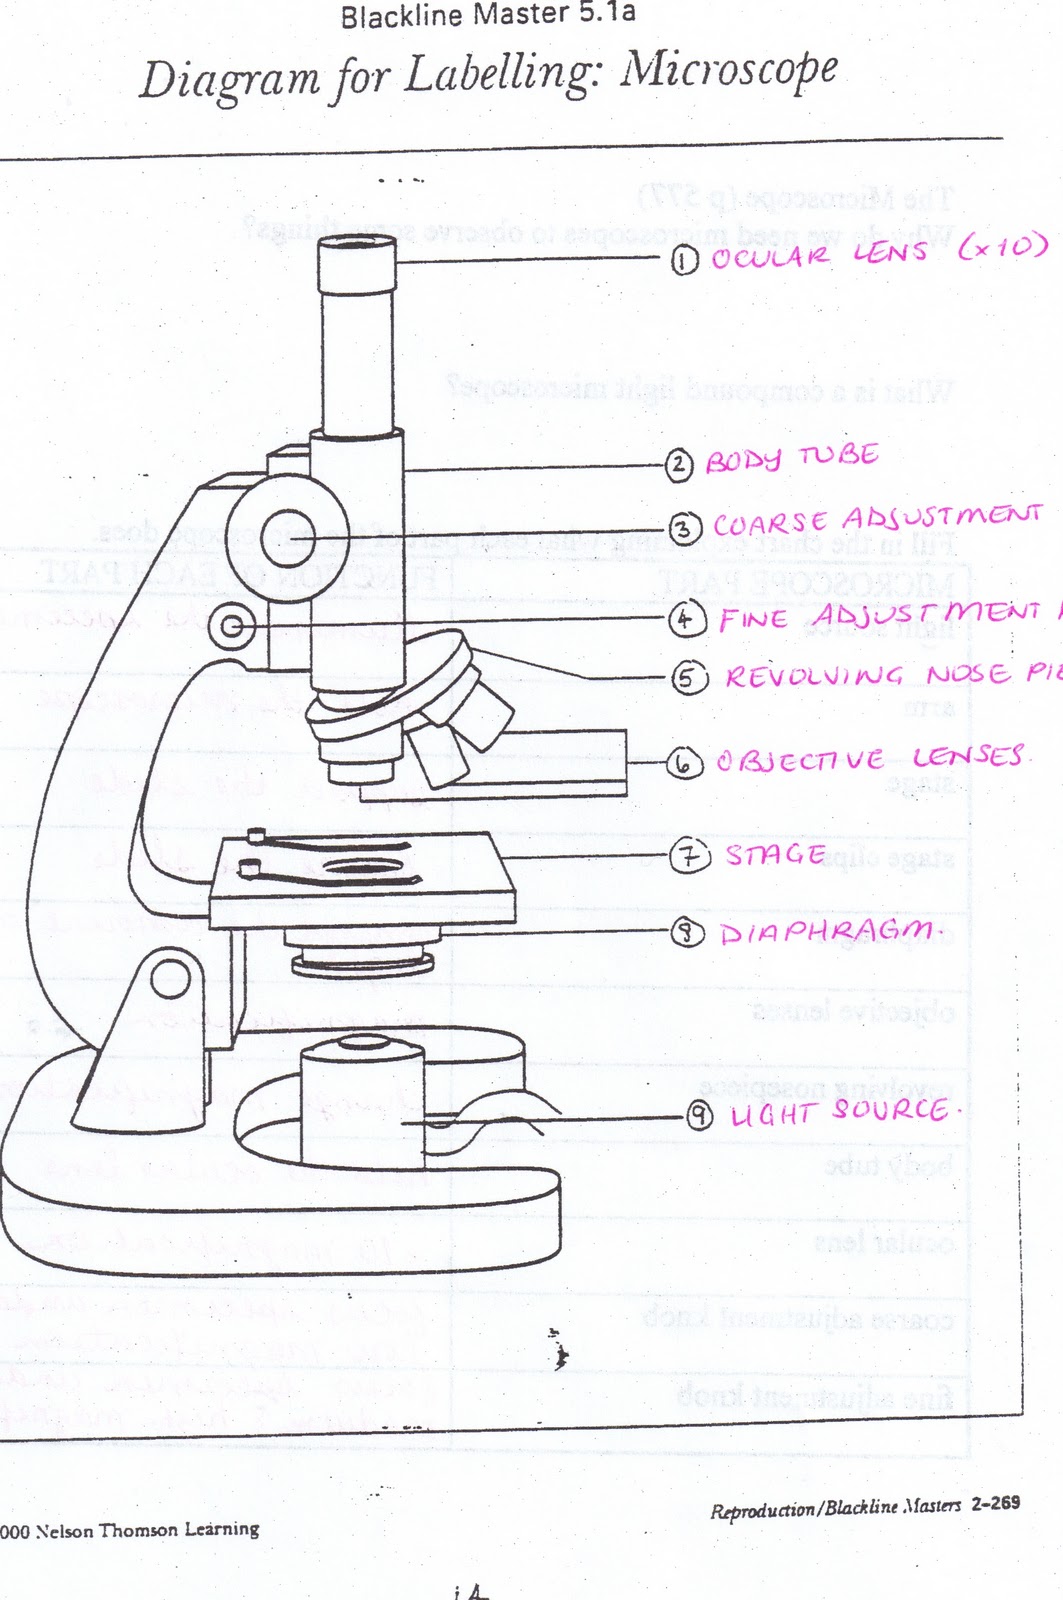 All Saints Online: Diagram for Labelling: Microscope